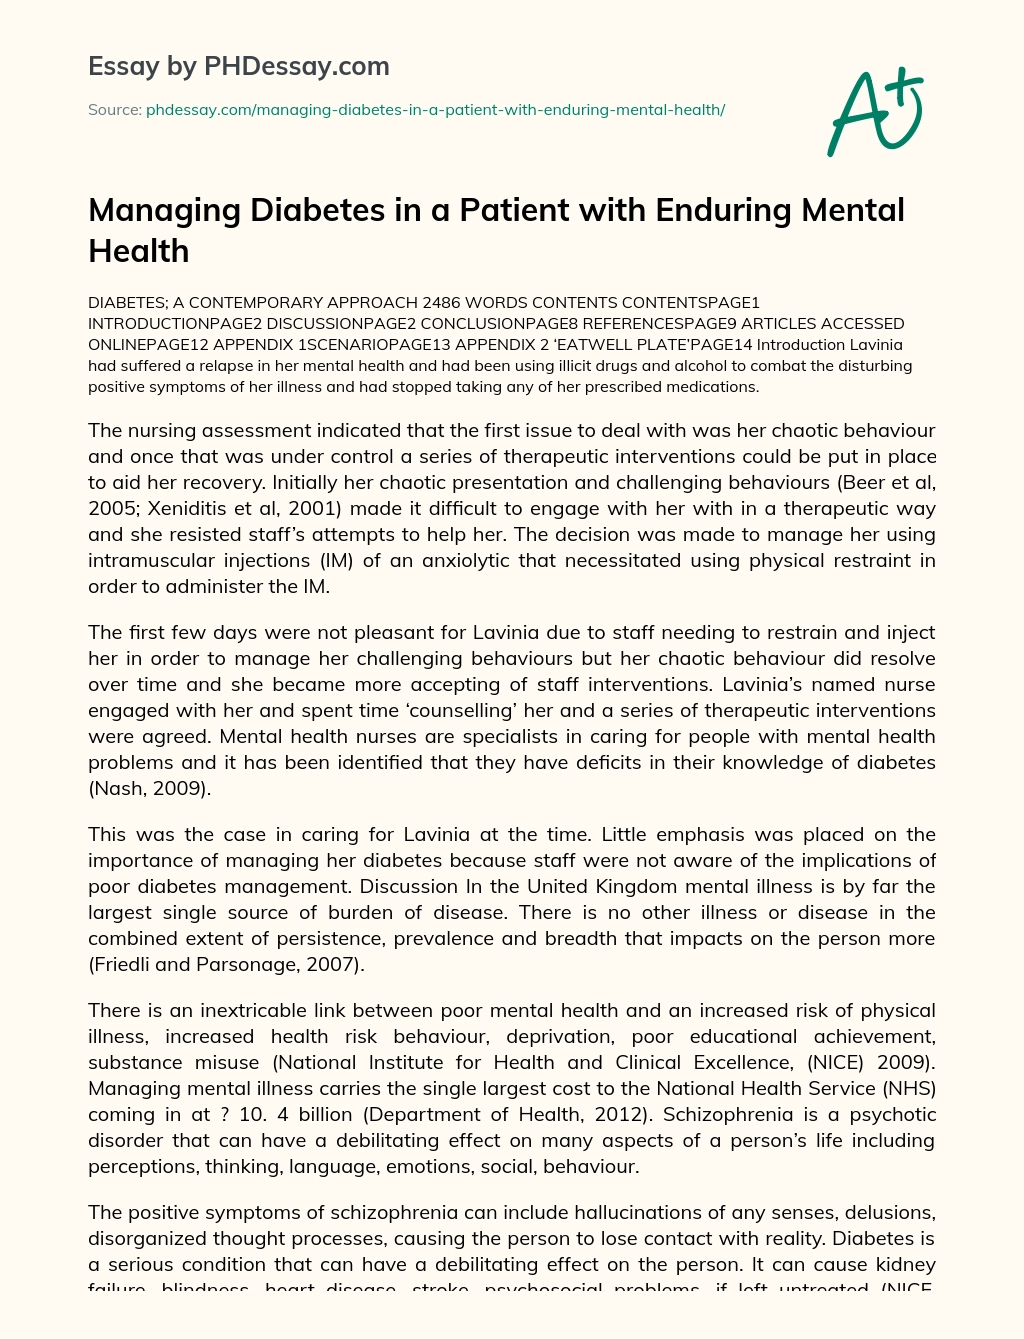 Managing Diabetes in a Patient with Enduring Mental Health essay